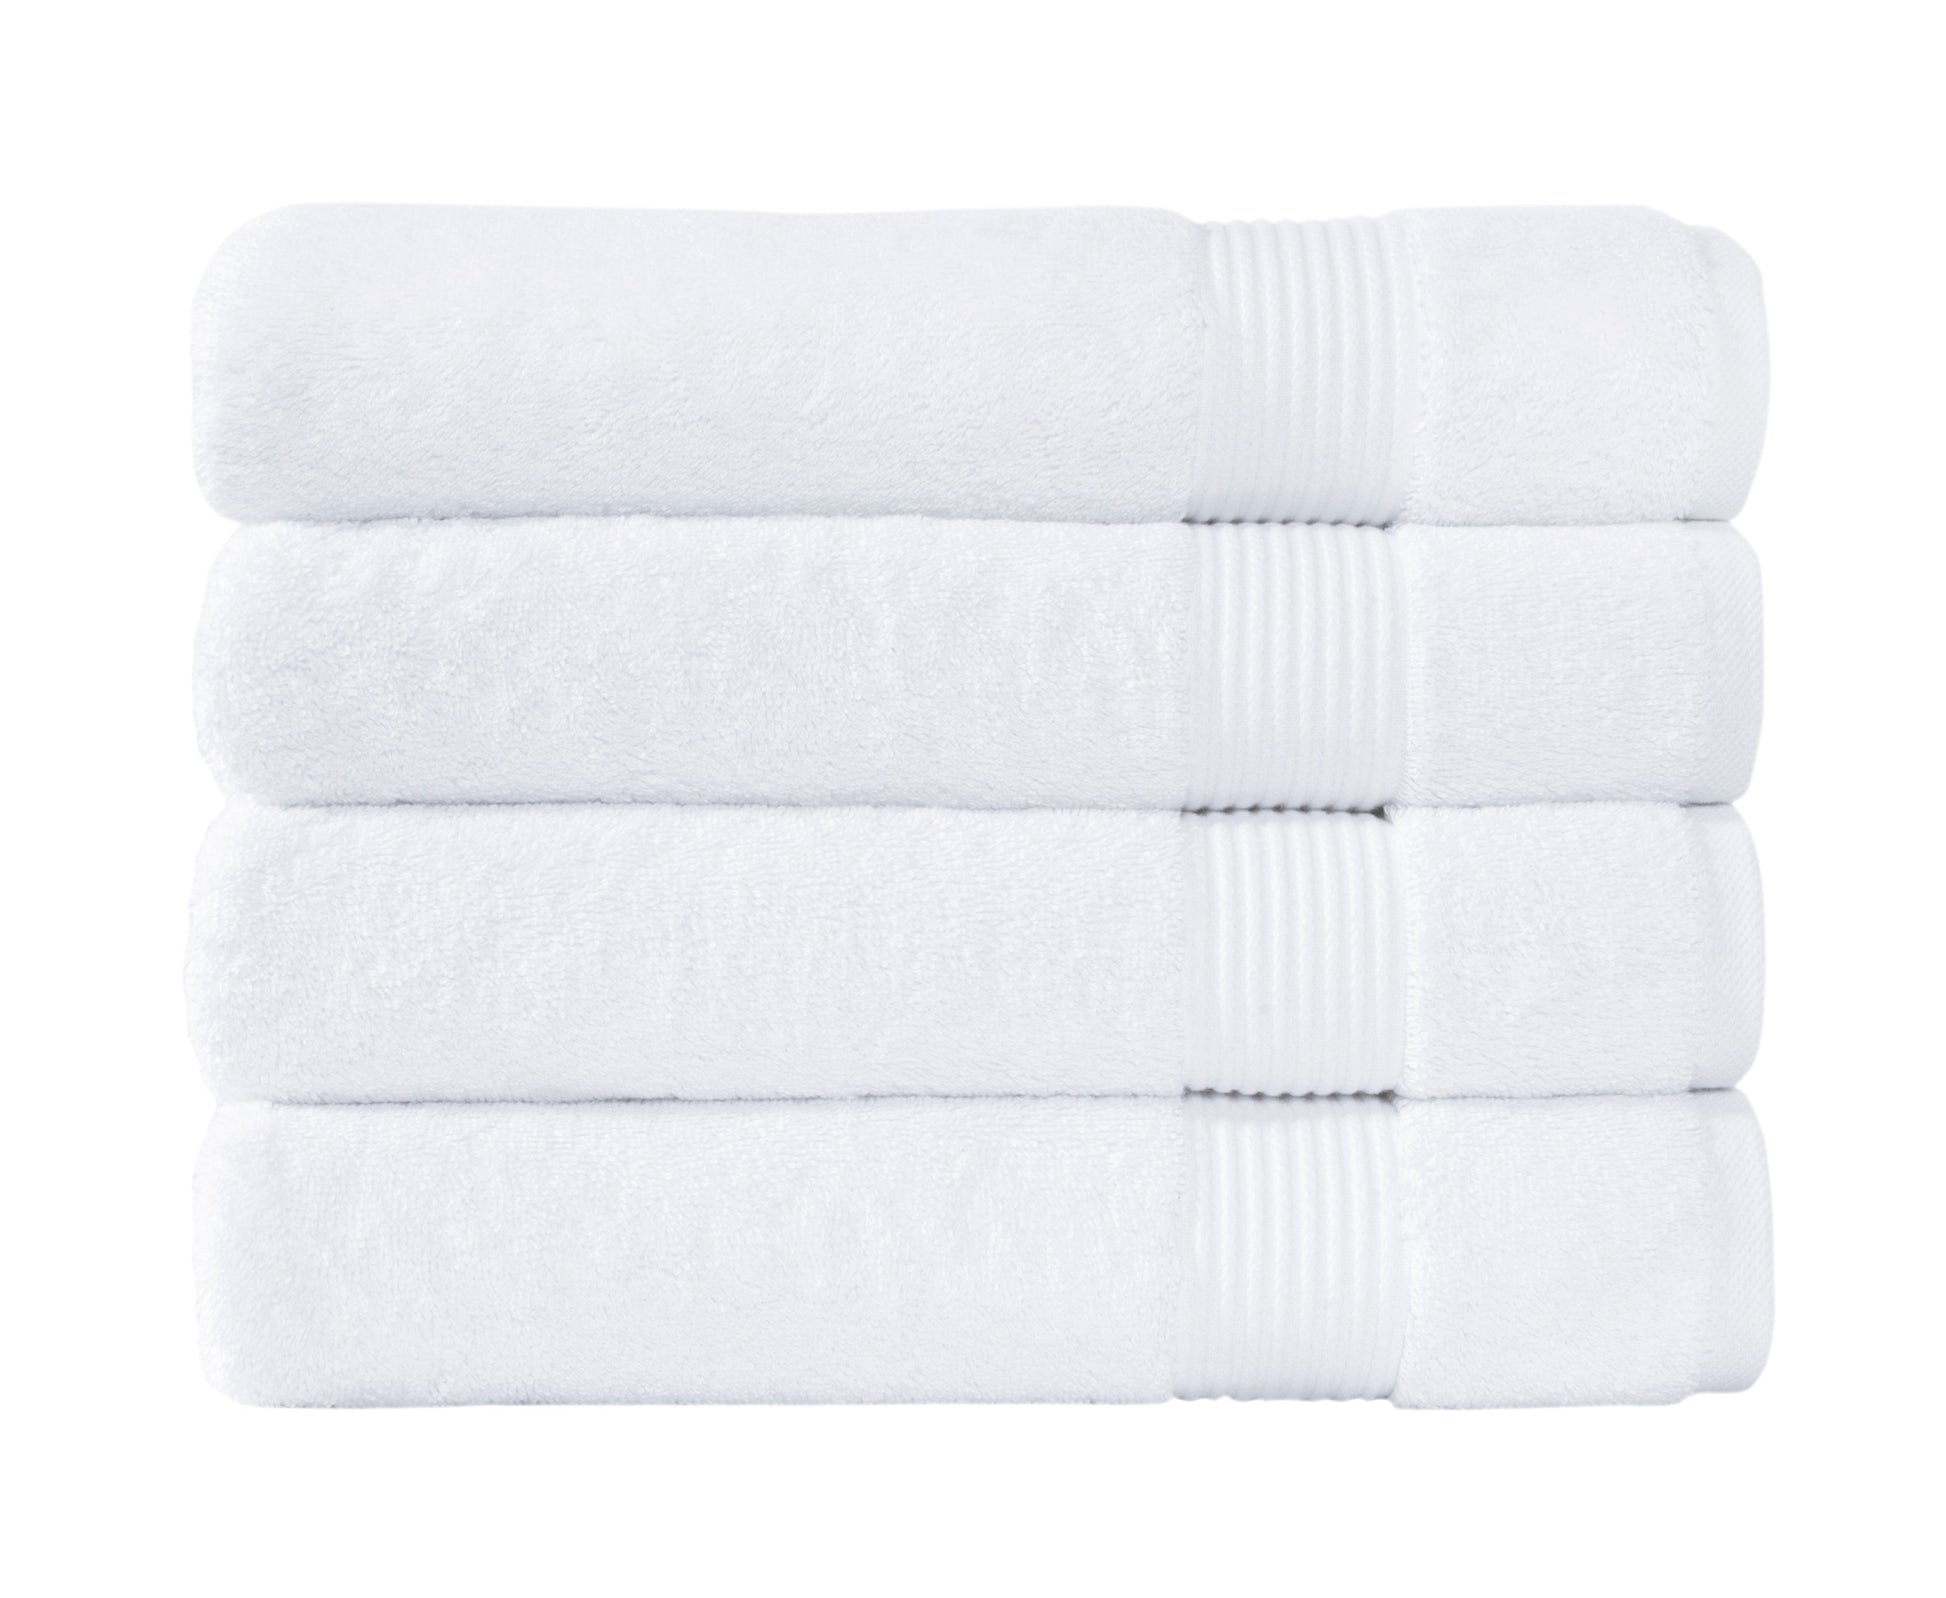 Wholesale Luxury Collection Towel White Cheap SPA Hotel Bath Towels Sale -  China Collection Towel and Best Towels price